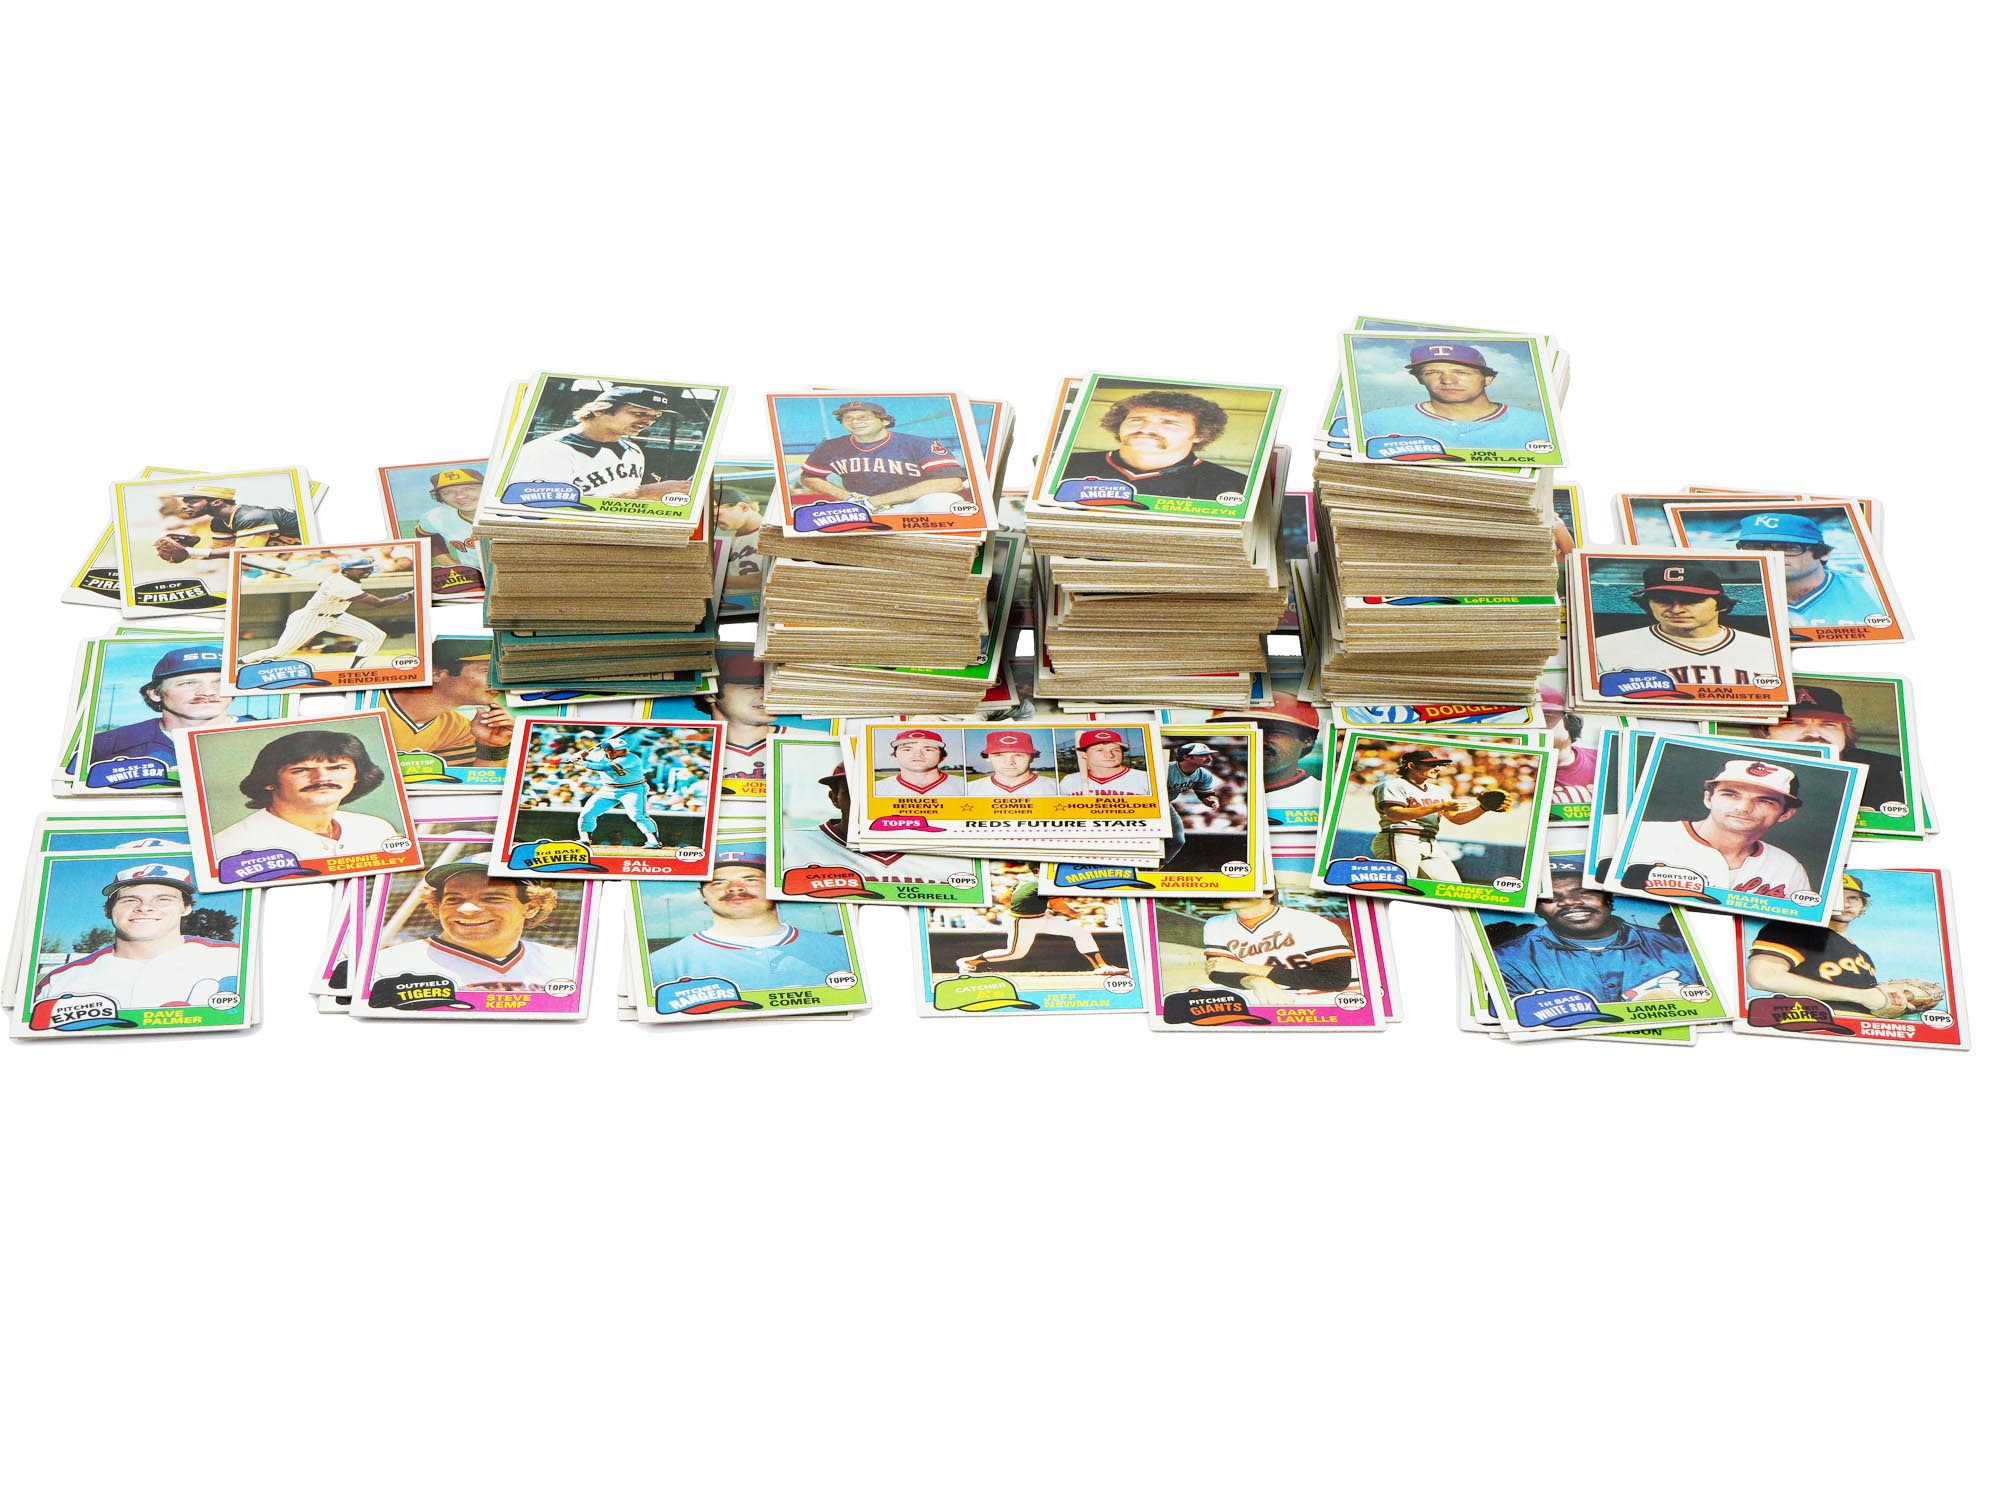 LARGE COLLECTION OF 1981 TOPPS AND FLEER TRADING CARDS PIC-0